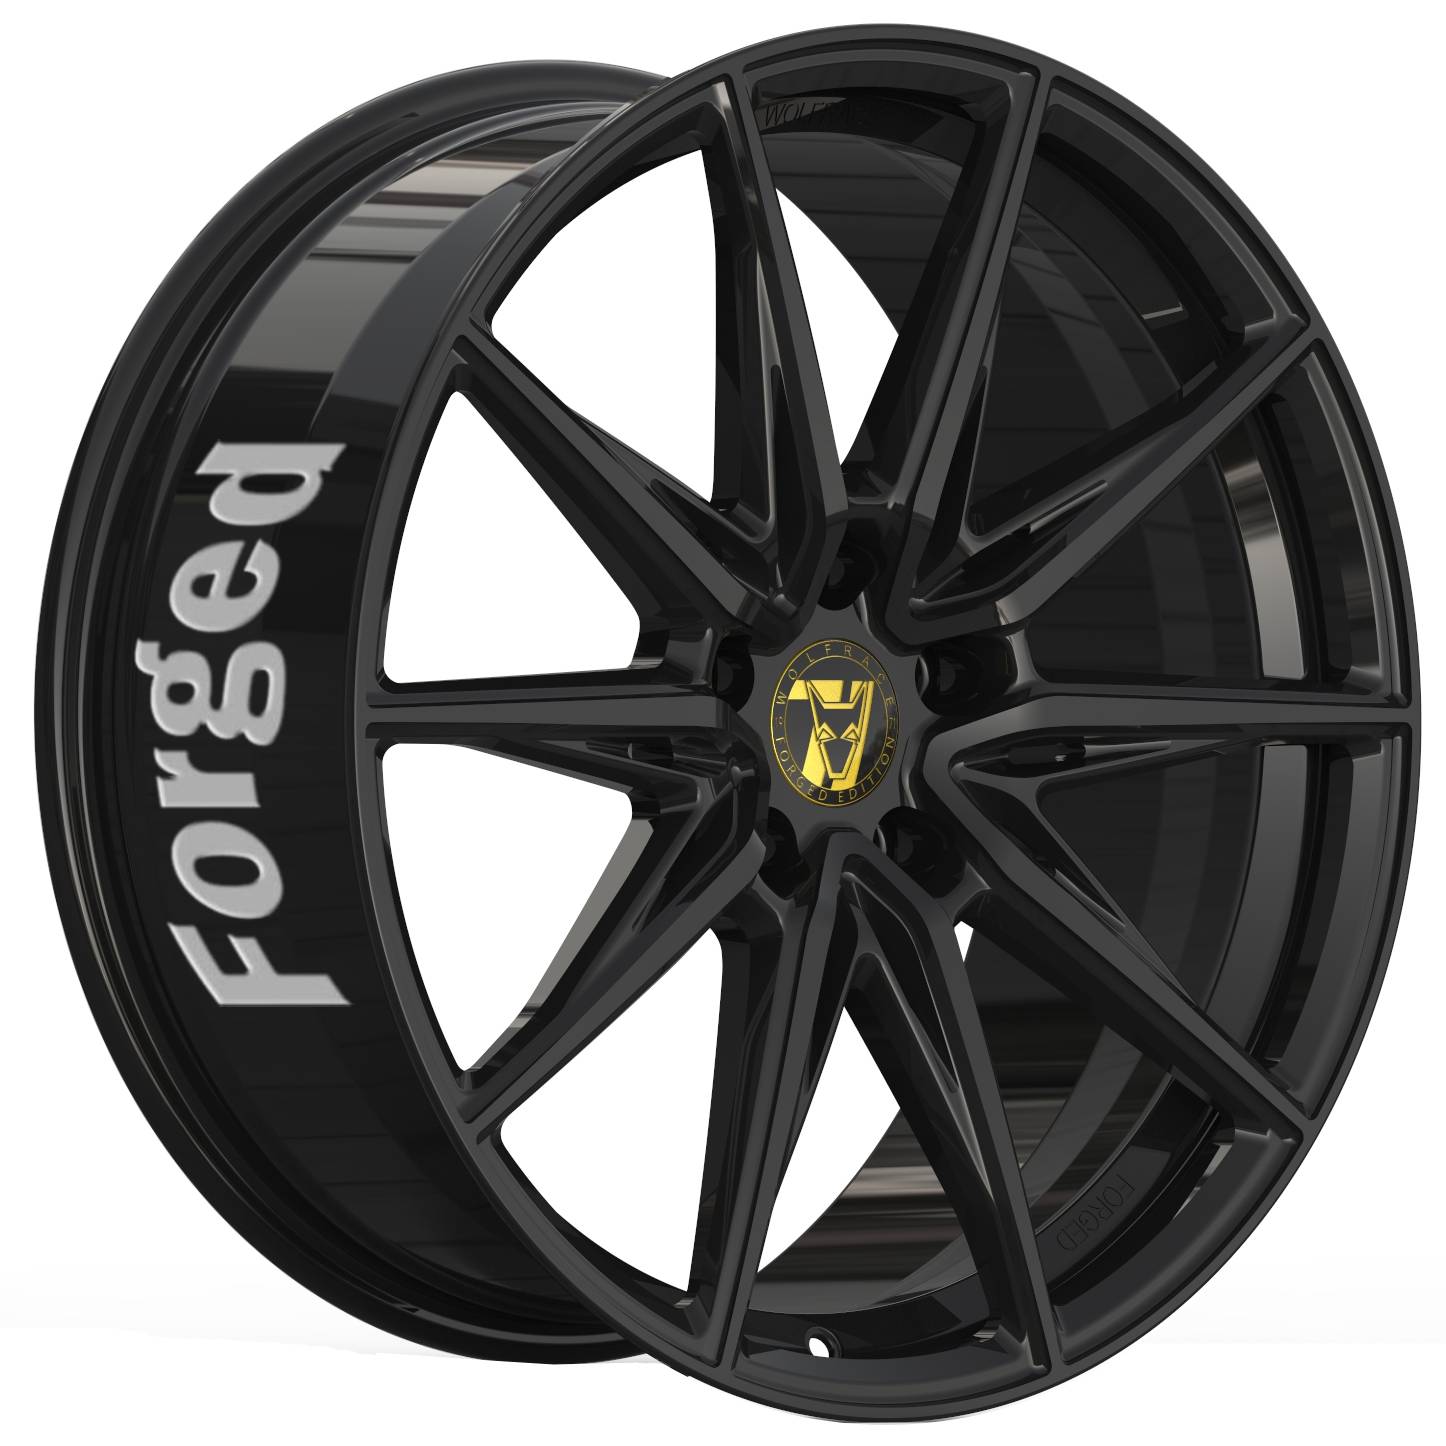 Demon Wheels 71 Forged Edition Urban Racer Forged [13x24] -5x112- ET 45